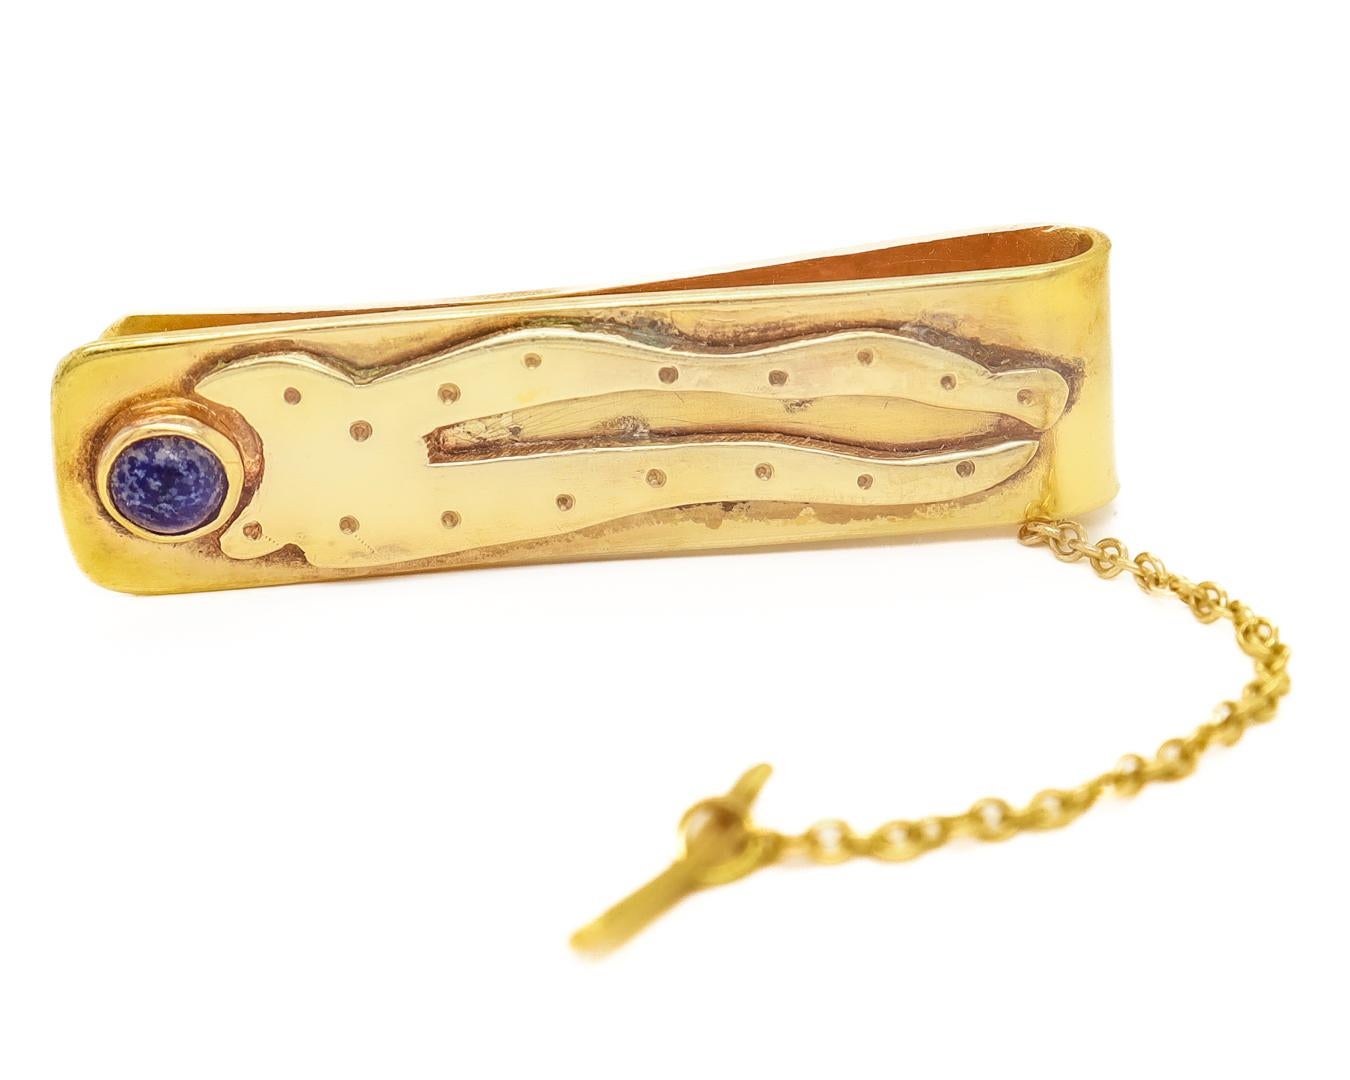 A fine signed Modernist tie bar.

By Sam Kramer.

In 14k gold.

Bezel-set with a round lapis lazuli cabochon and with an applied decoration to the head.

Set with a safety chain and a button bar. 

(The piece could easily also double as a money